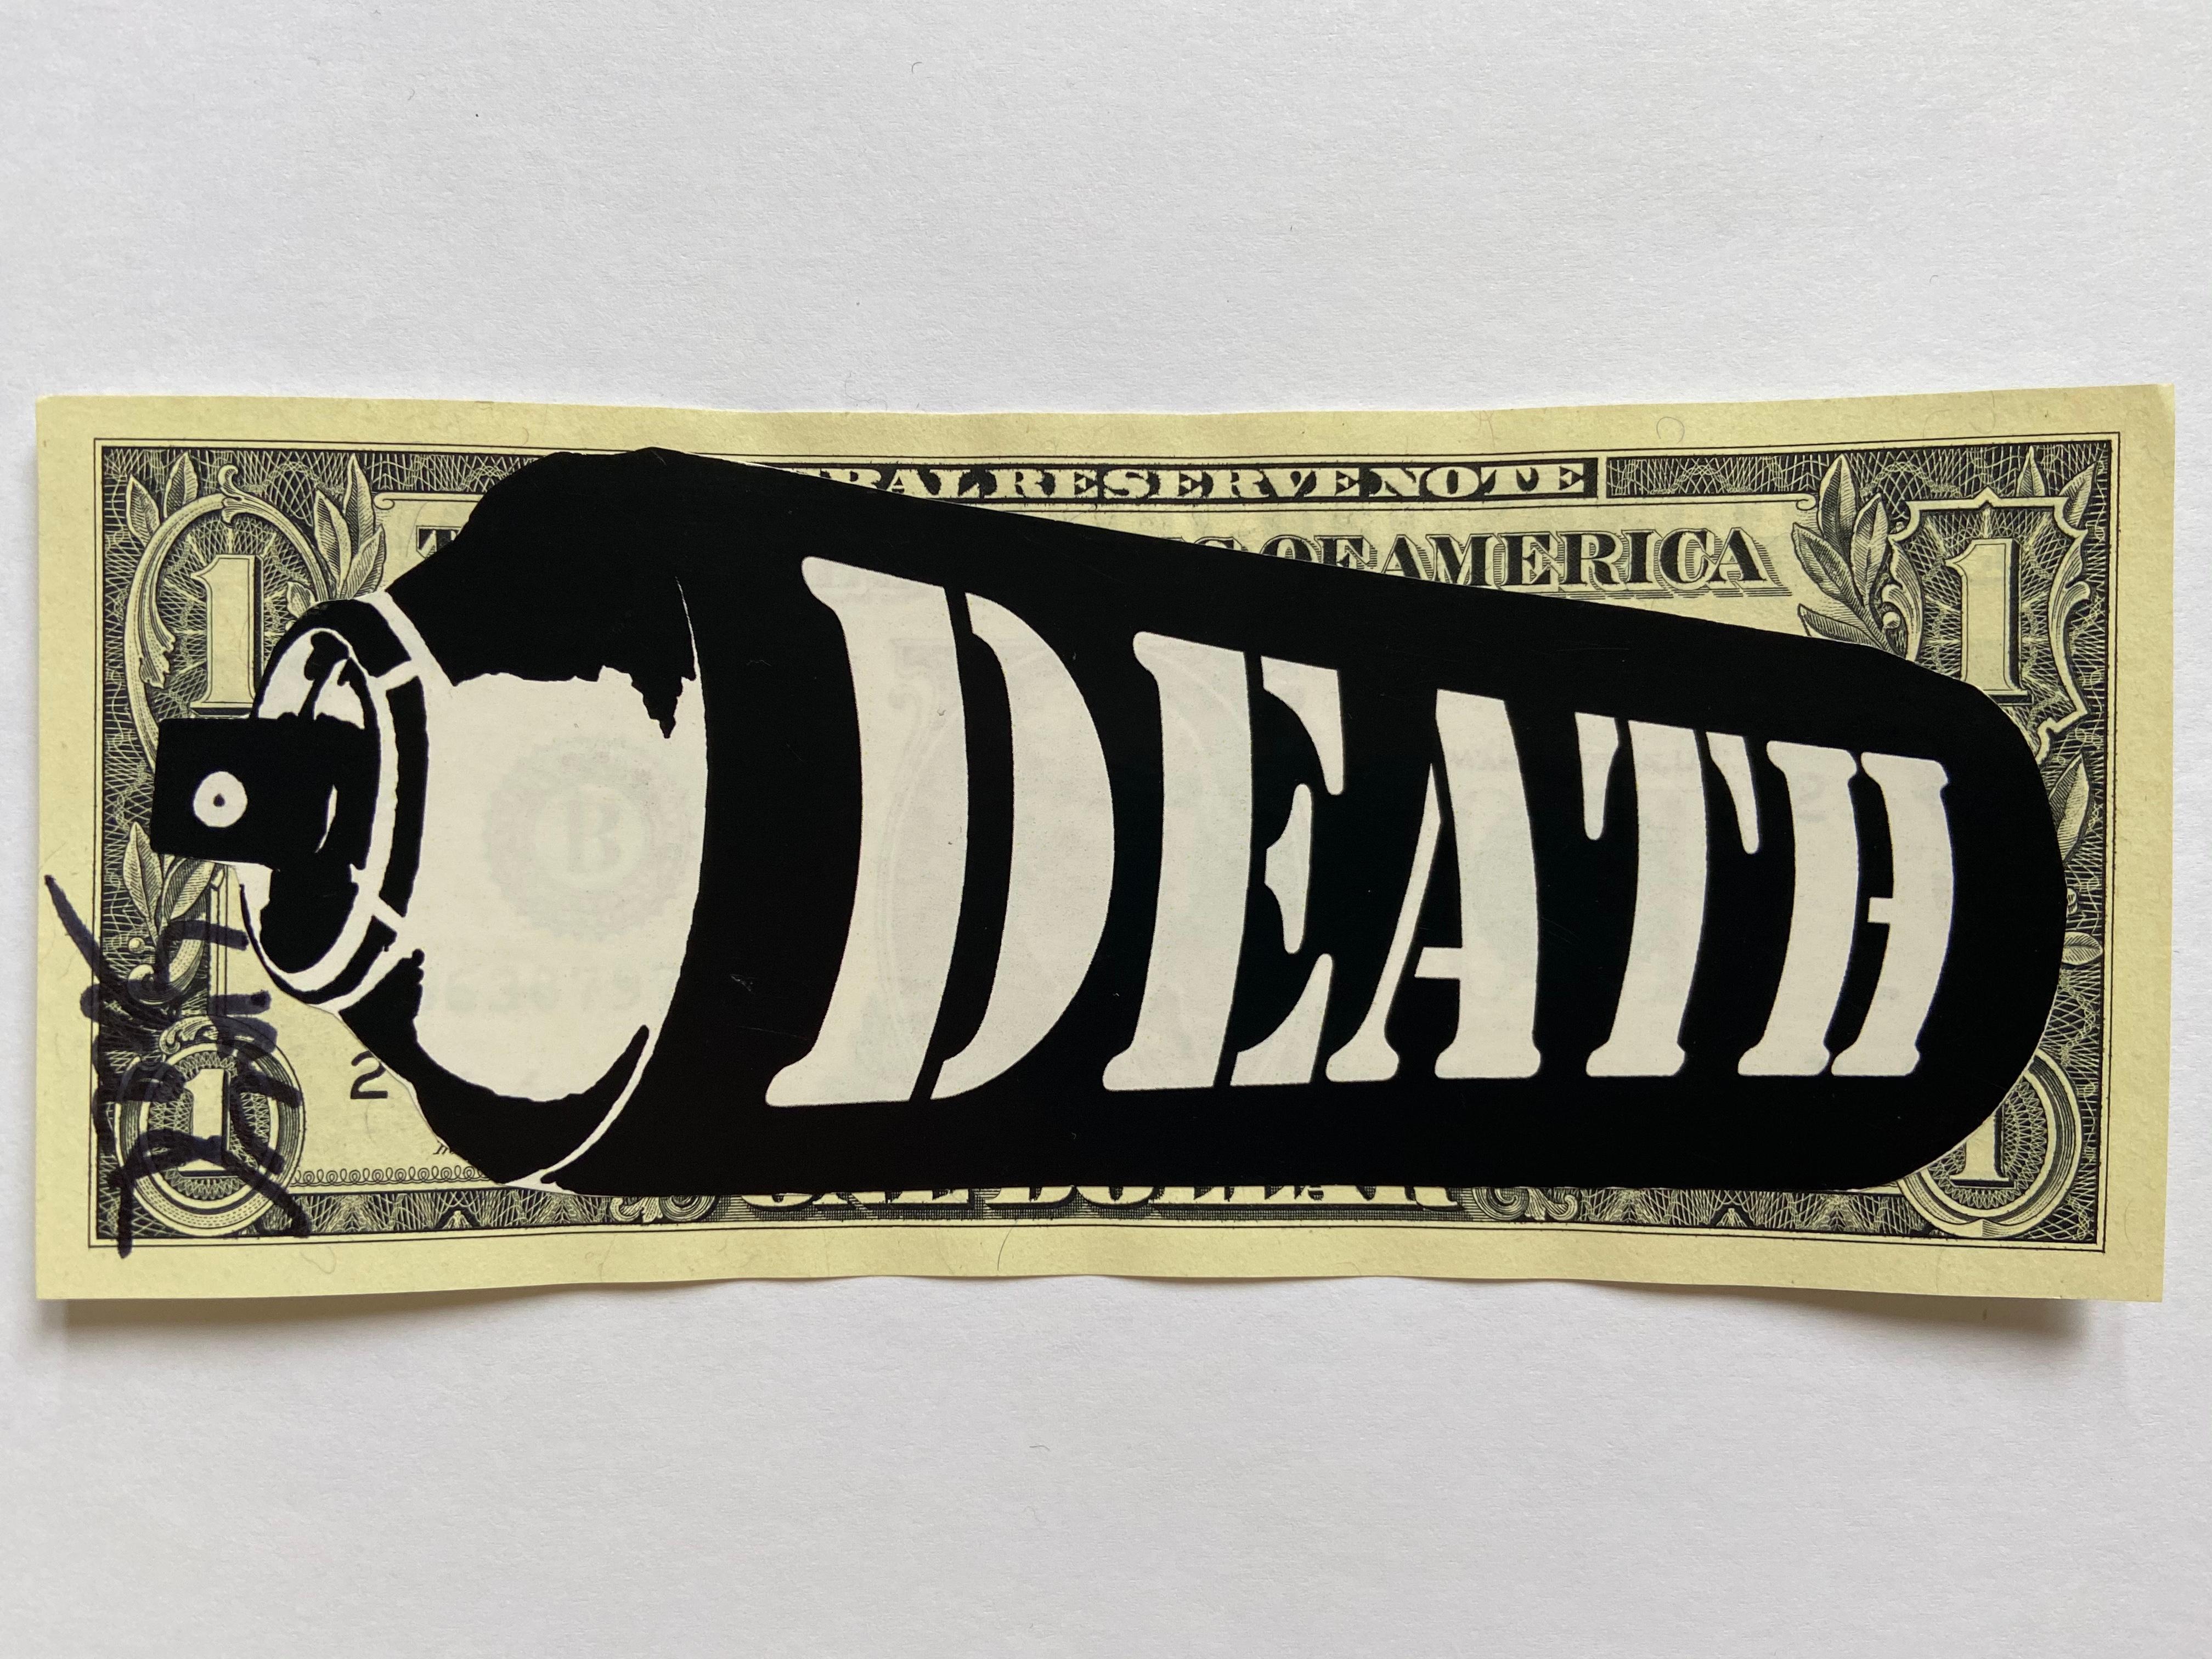 Death NYC
WHITE DEATH SPRAY
2016
Gluing on 1 dollar notes
Signed by the artist
Size: 7 x 15.5 cm
Original copy, delivered with certificate of authenticity and stamp of the artist
Perfect condition 
99 euros